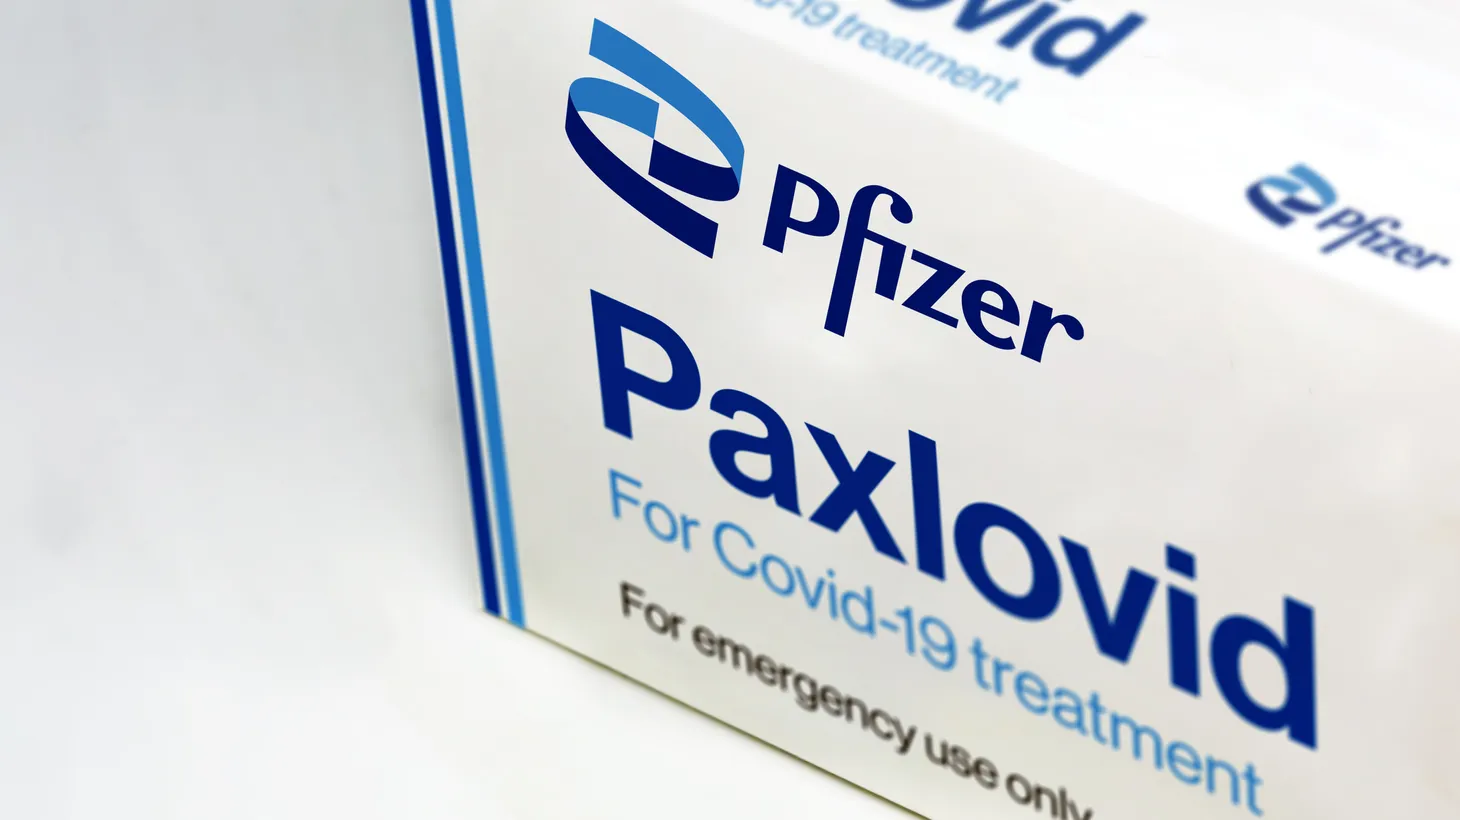 The Department of Health and Human Services set up a program ensuring that people with Medicare could still get Paxlovid for free through 2024.